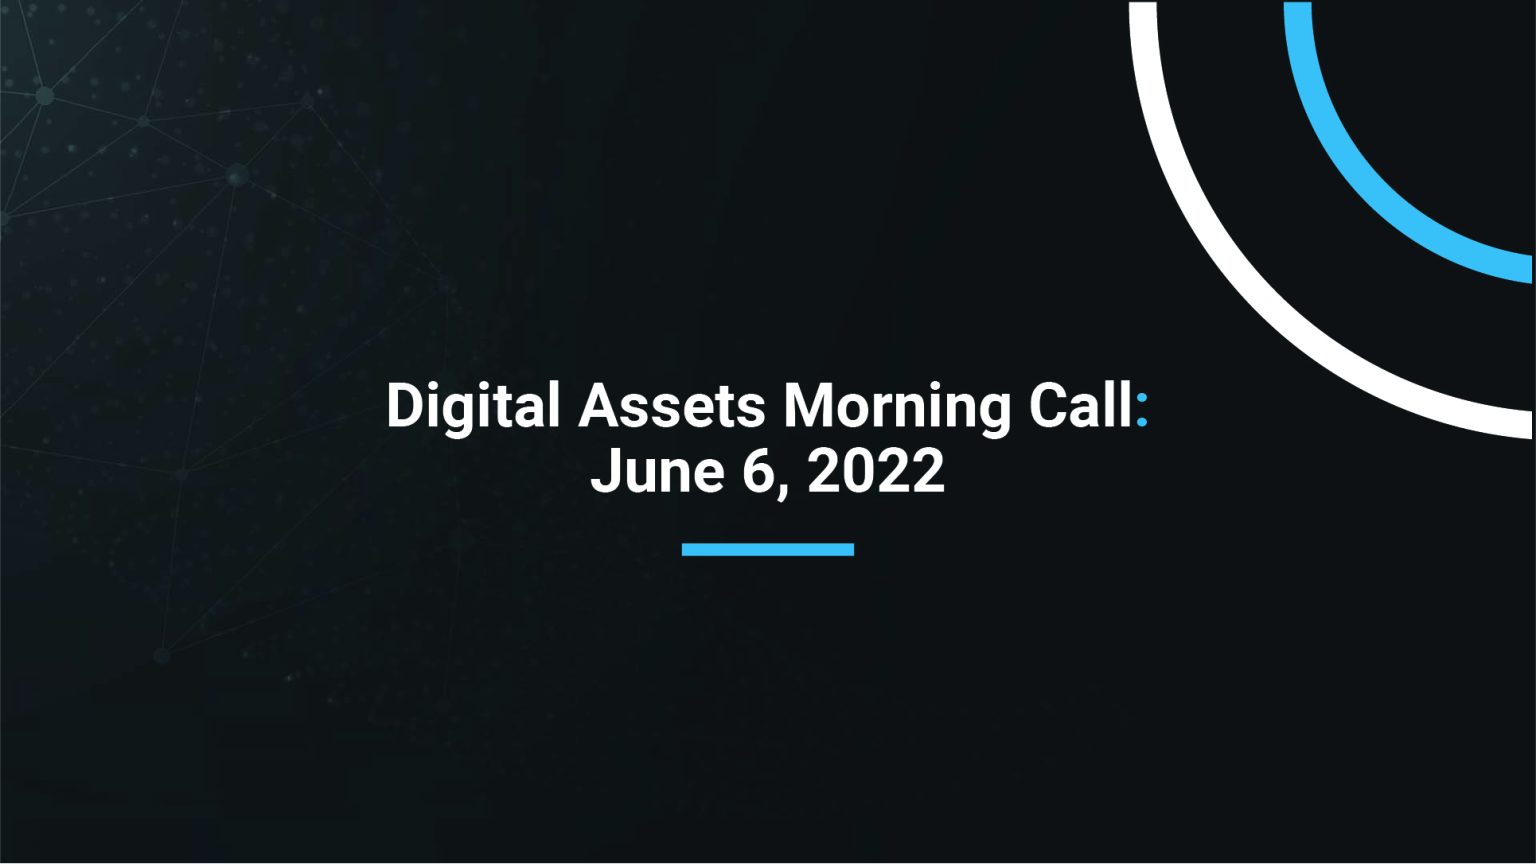 Digital Assets Morning Call: June 6 2022 - China developments aid risk appetite and major crypto assets